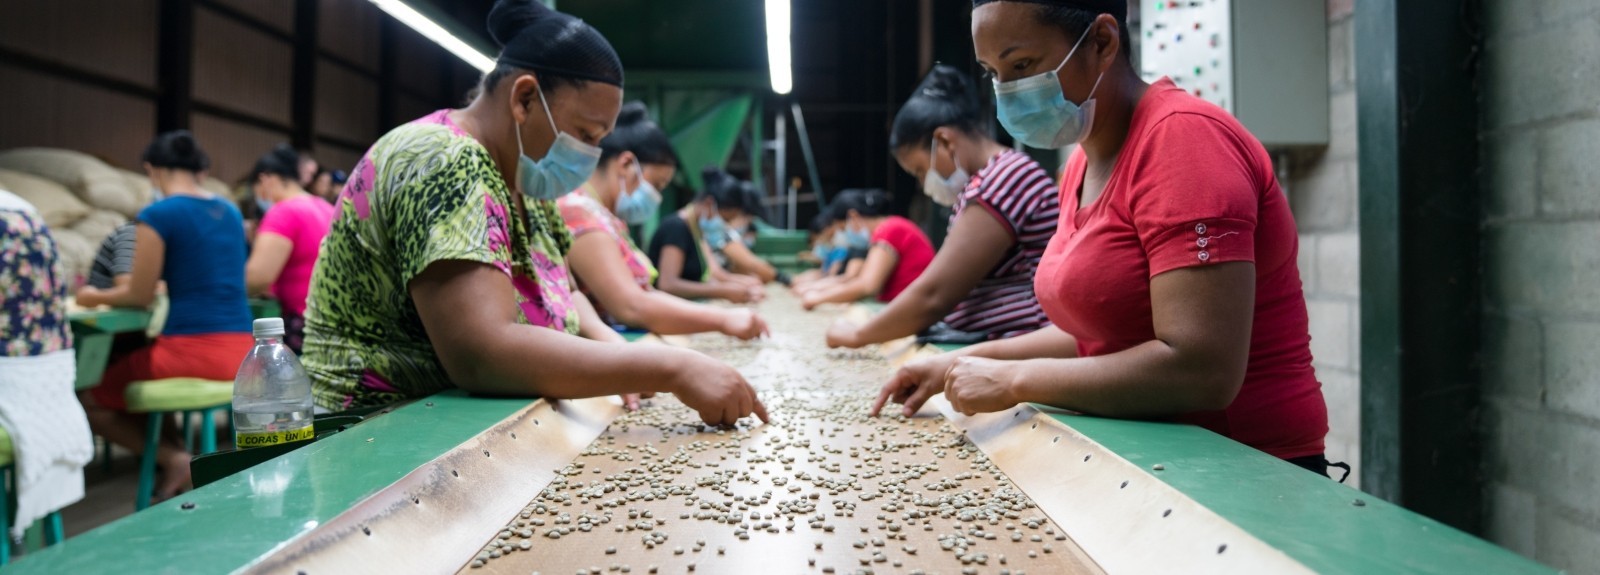 Women coffee farmers sort coffee beans at a cooperative facility